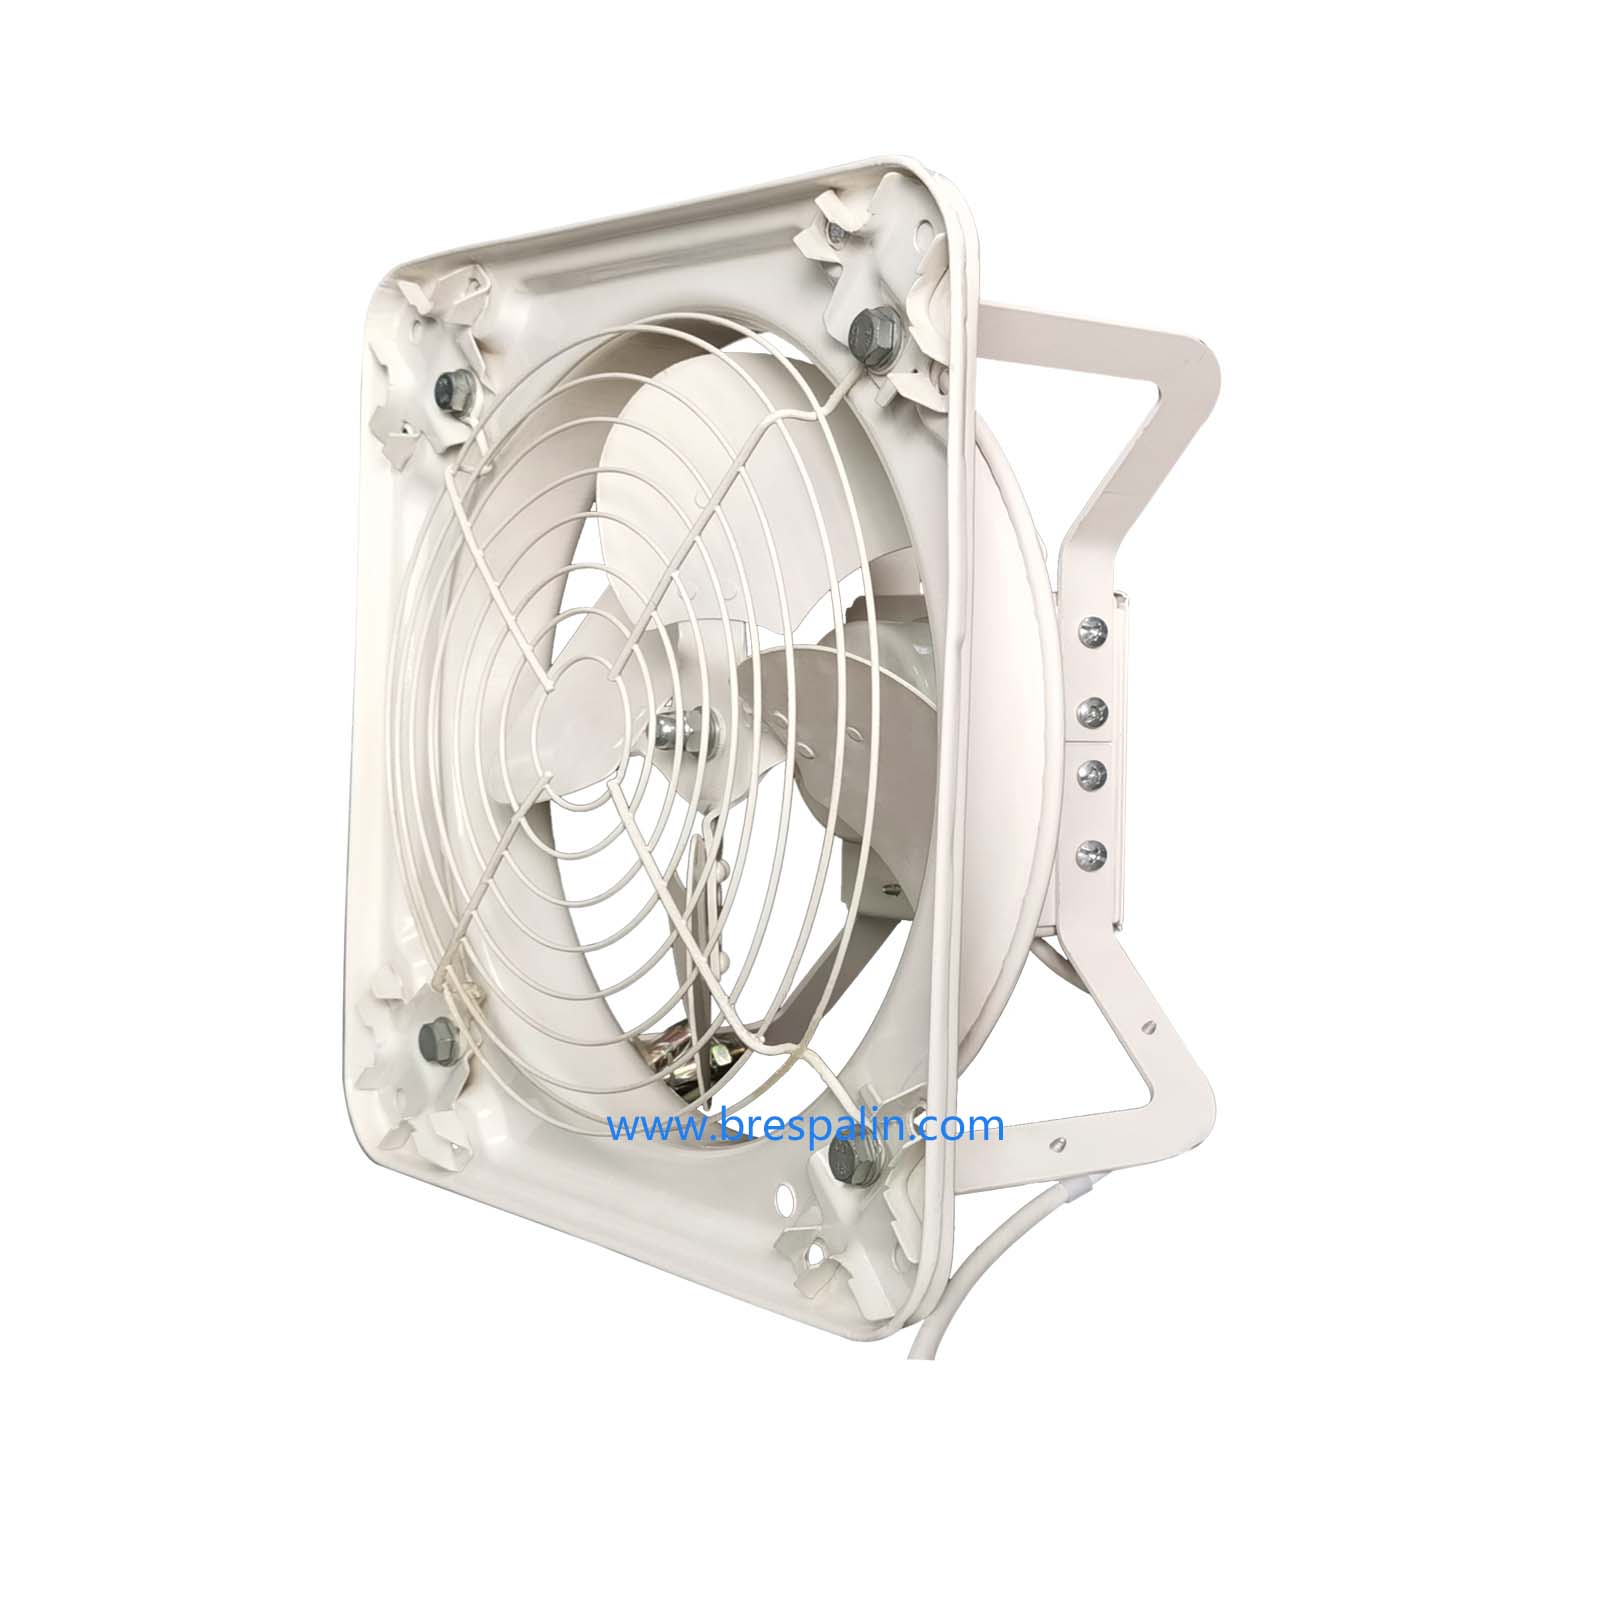 20 Inch Axial Flow Industrial Heavy Duty Exhaust Fan Price in Bangladesh for Hot Air Extr